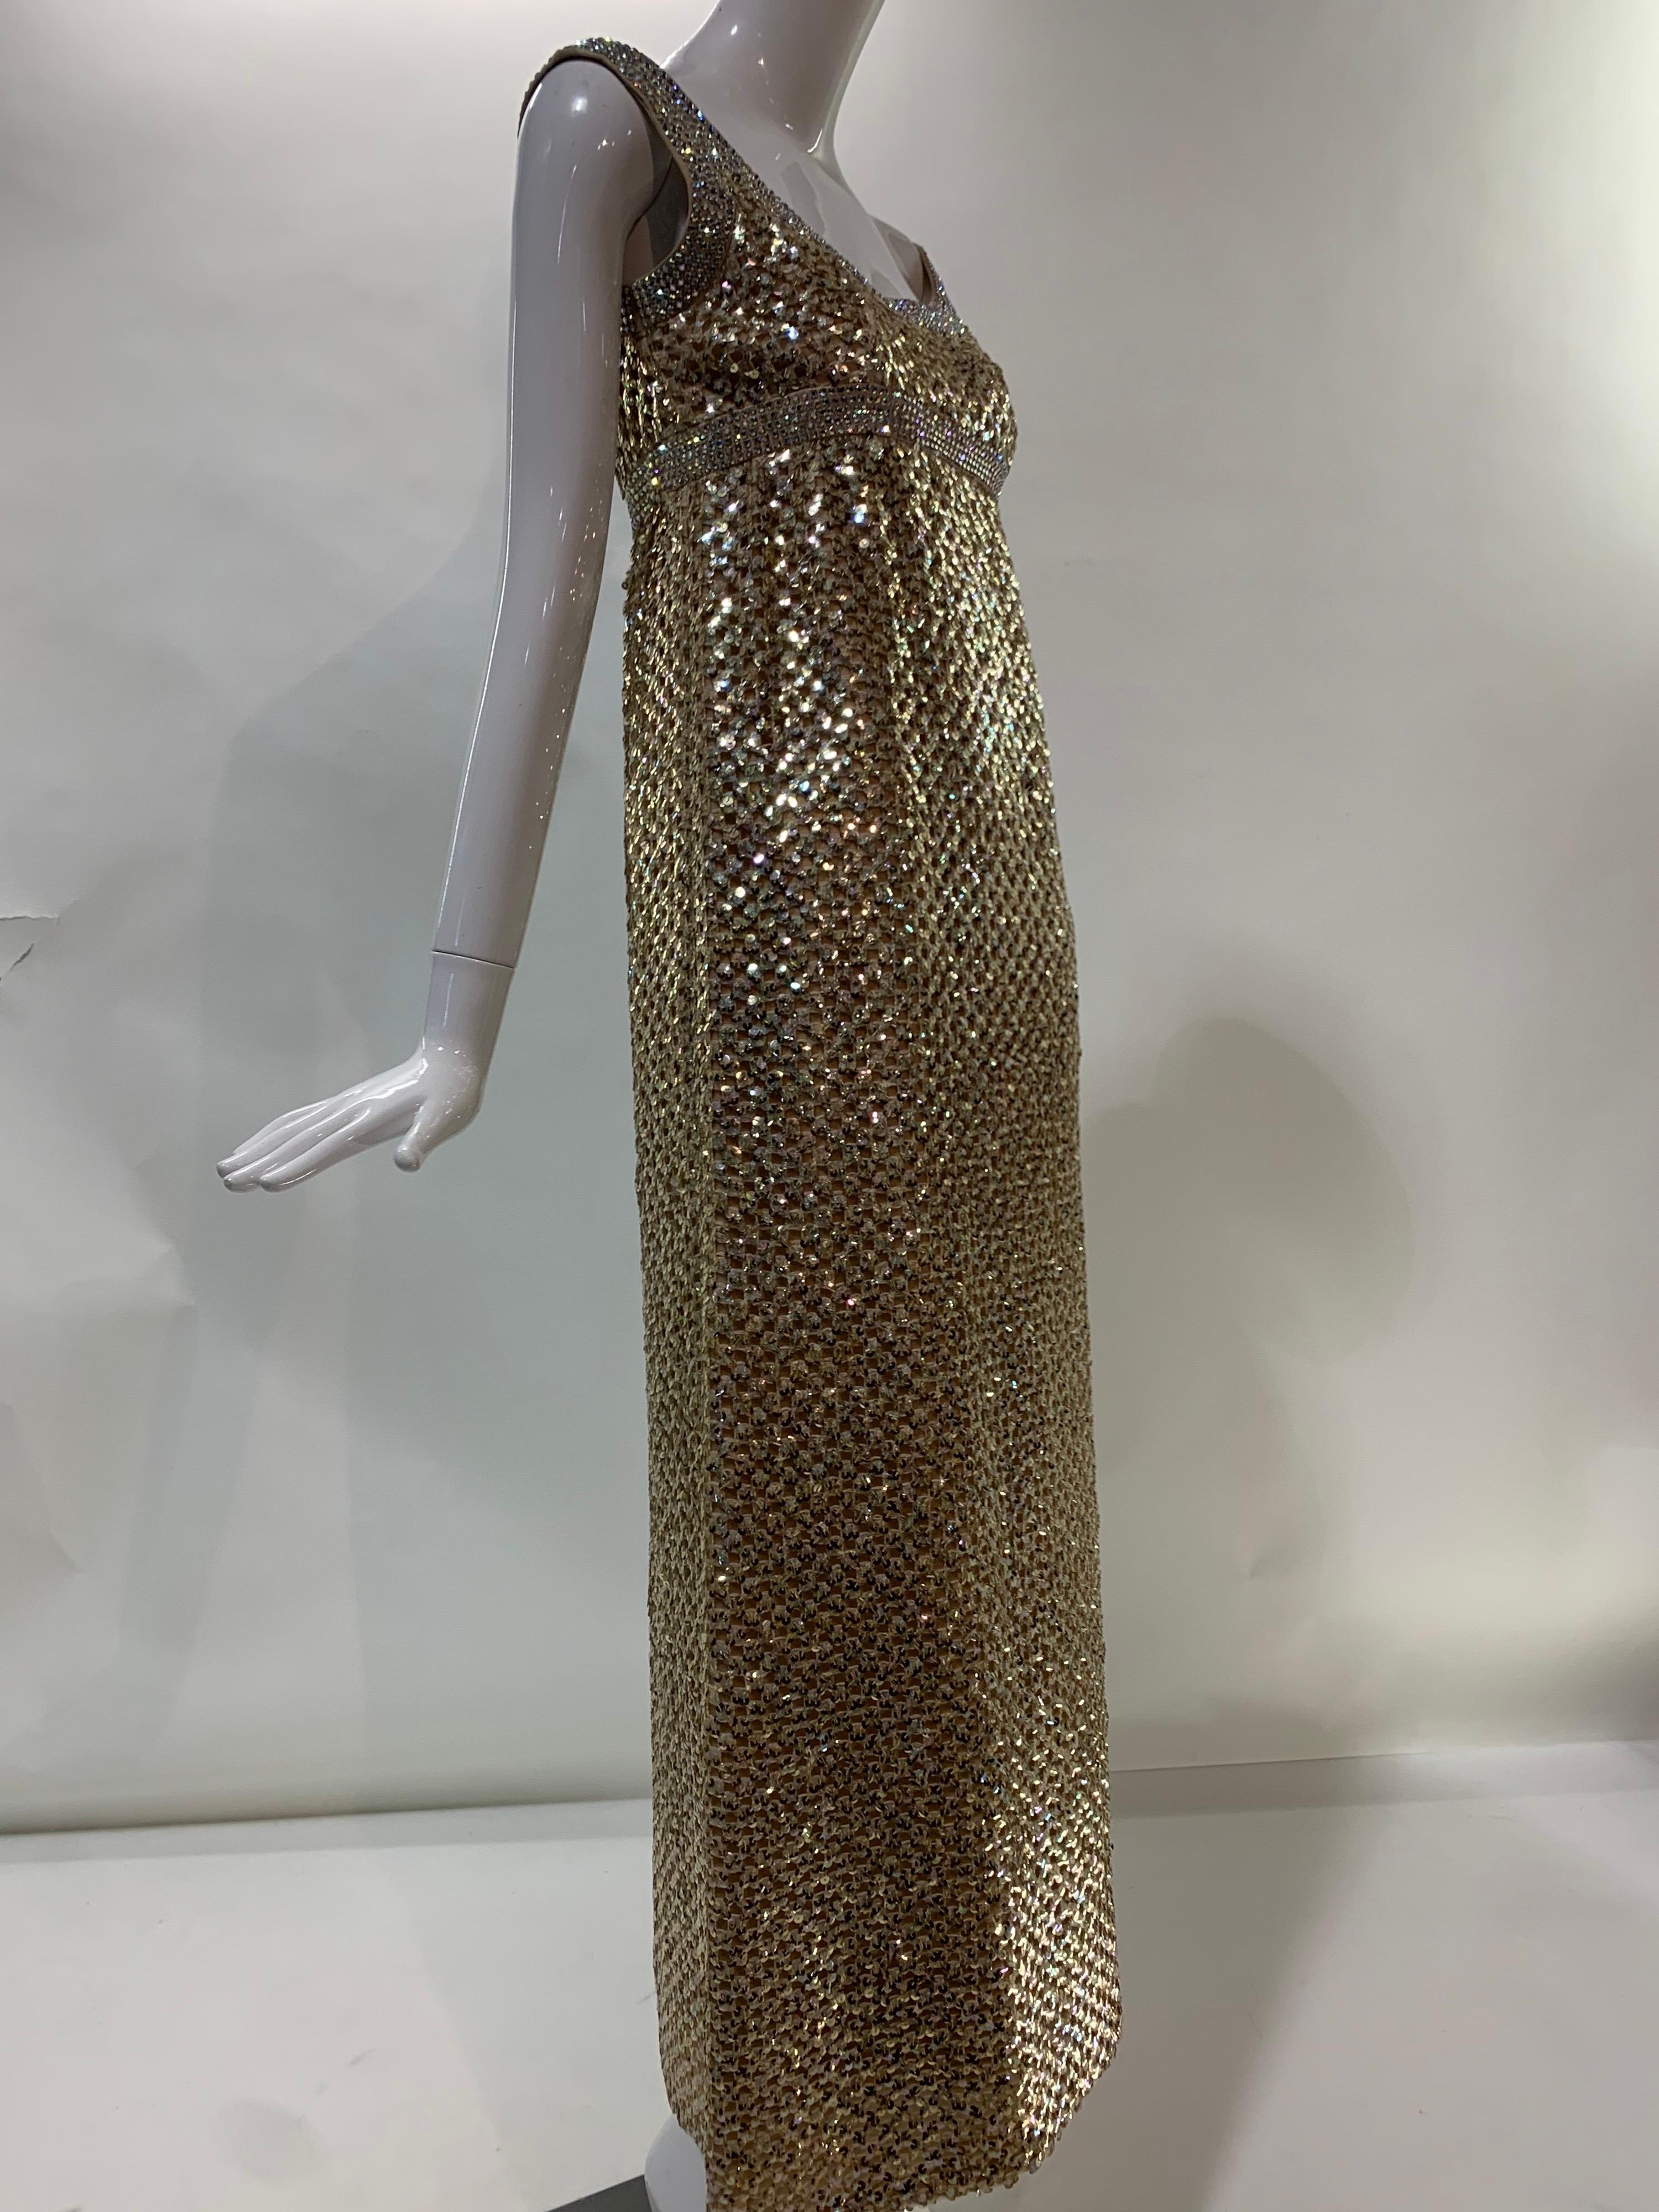 1960s Mod gold sequin lattice gown with a very high Empire waist and wide bands of iridescent prong-set rhinestones at waist and around neckline. Fully lined. Spectacular!  From Dayton's Oval Room. Back zipper. Size 6.